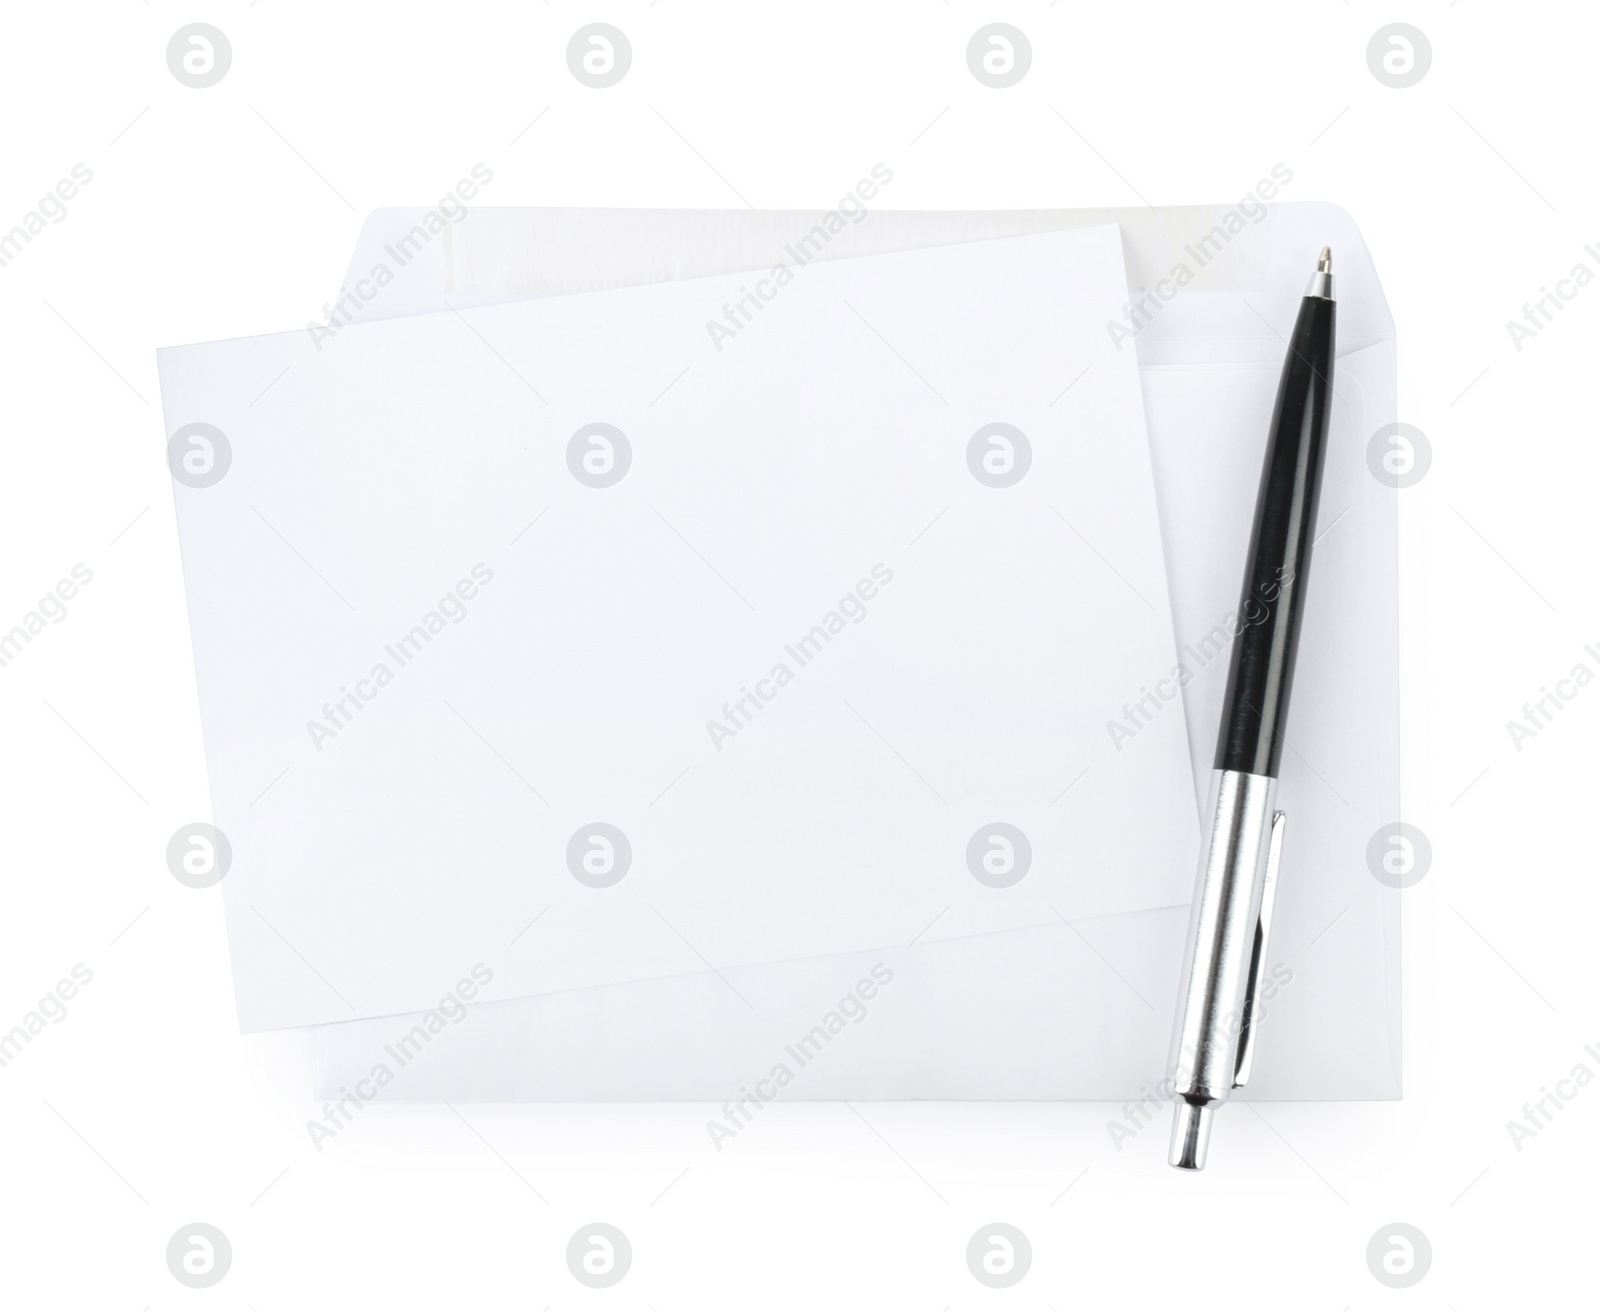 Photo of Envelope with blank letter and pen on white background, top view